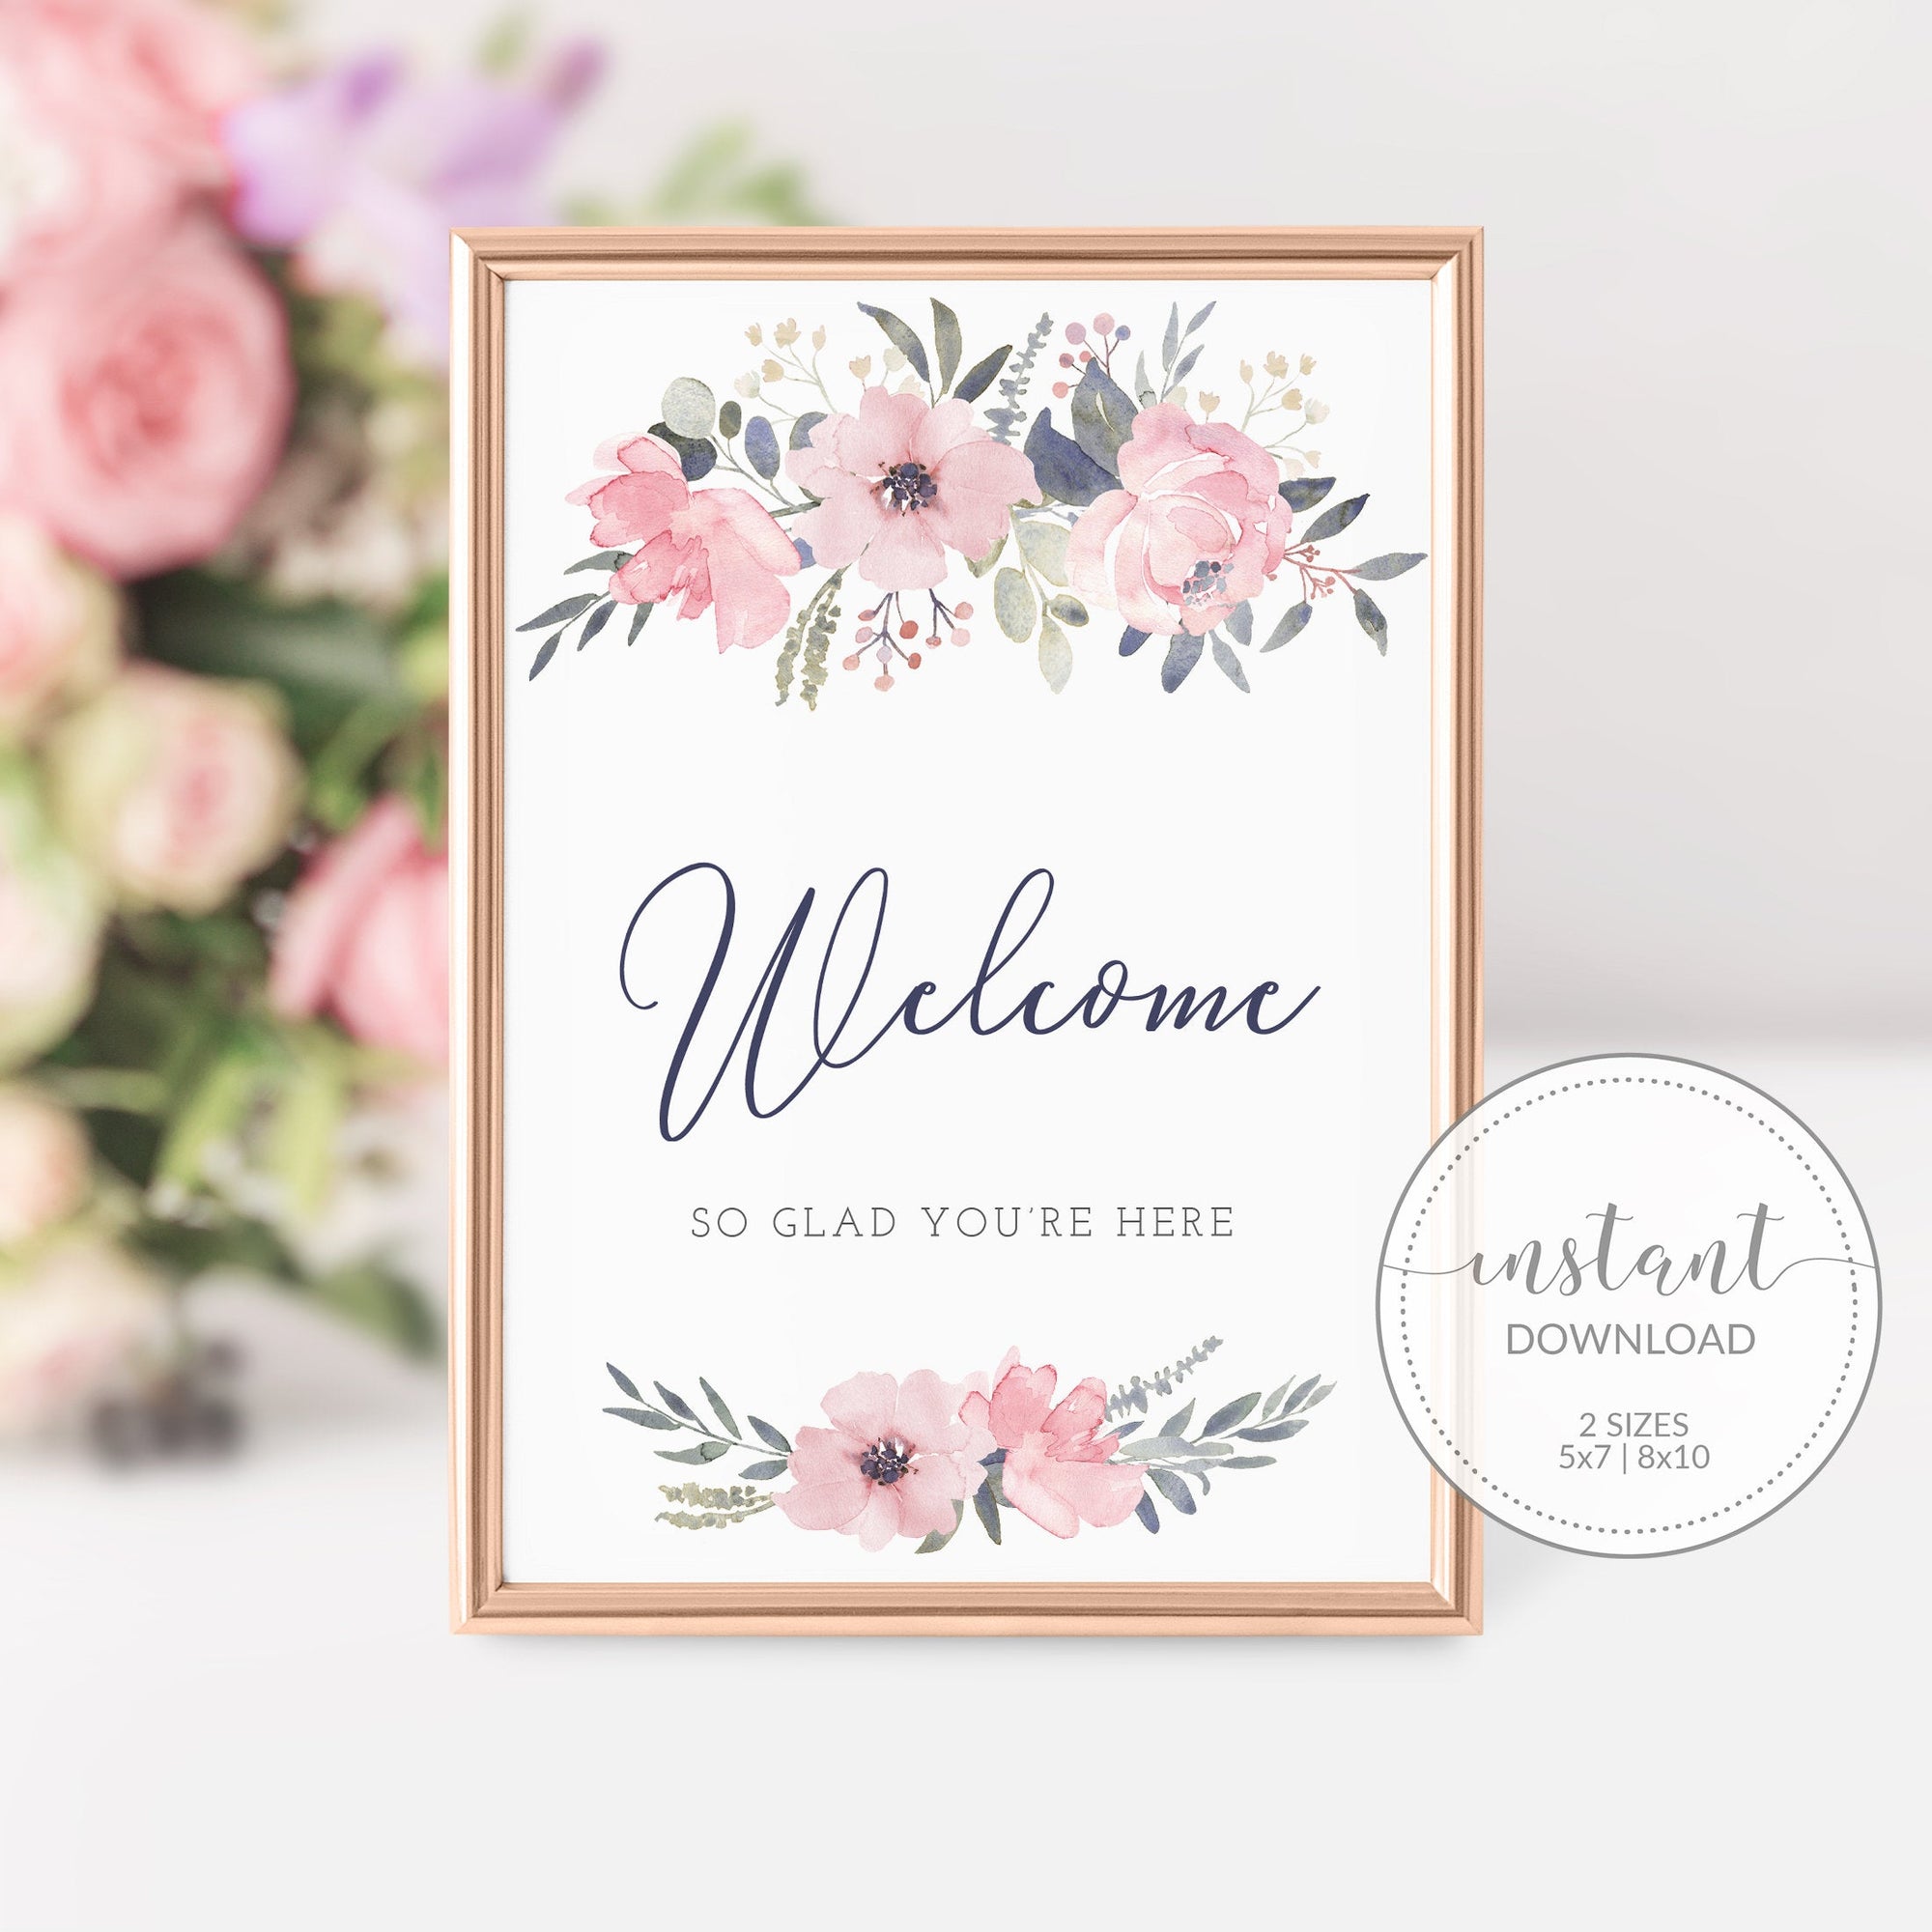 Navy And Blush Floral Printable Welcome Sign INSTANT DOWNLOAD, Birthday, Bridal Shower, Baby Shower, Wedding Decorations Supplies - NB100 - @PlumPolkaDot 